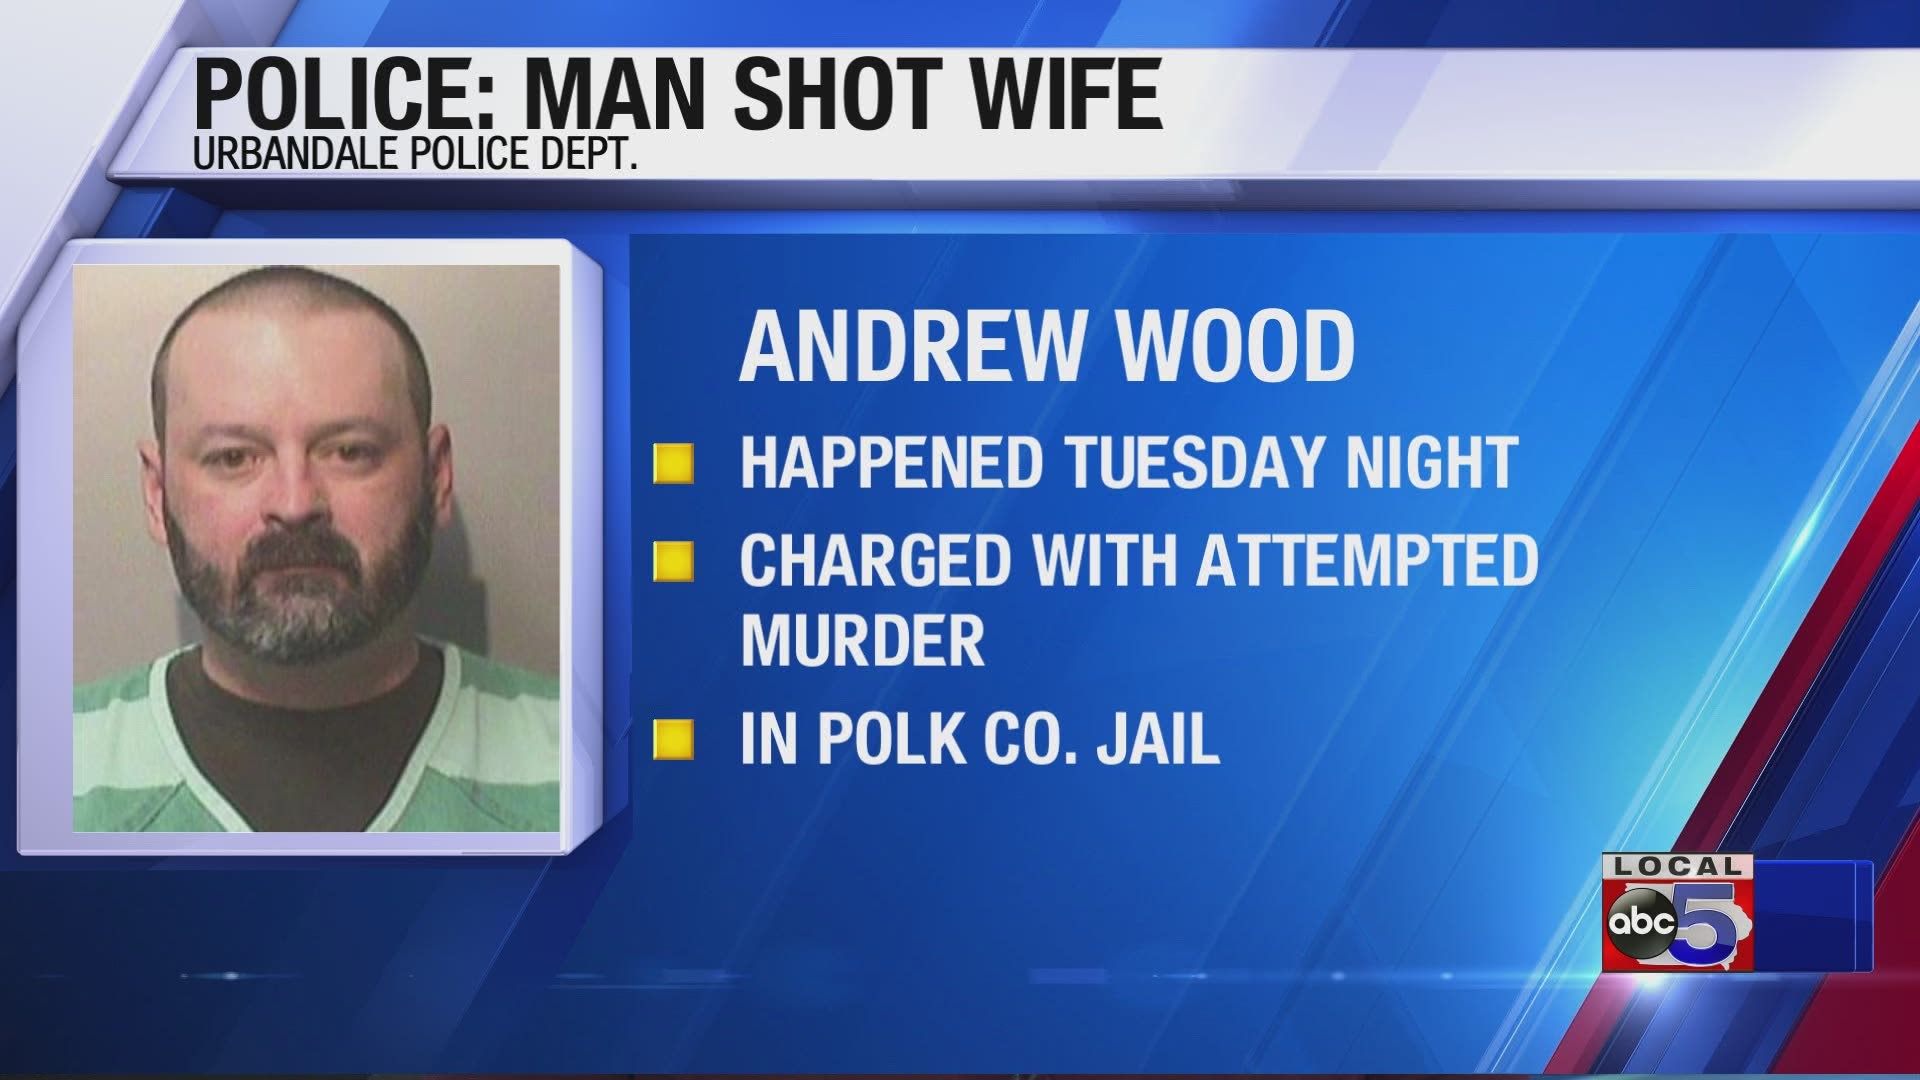 Andrew Wood, 45, is being held at the Polk County Jail on a $25,000 bond for allegedly shooting his wife.